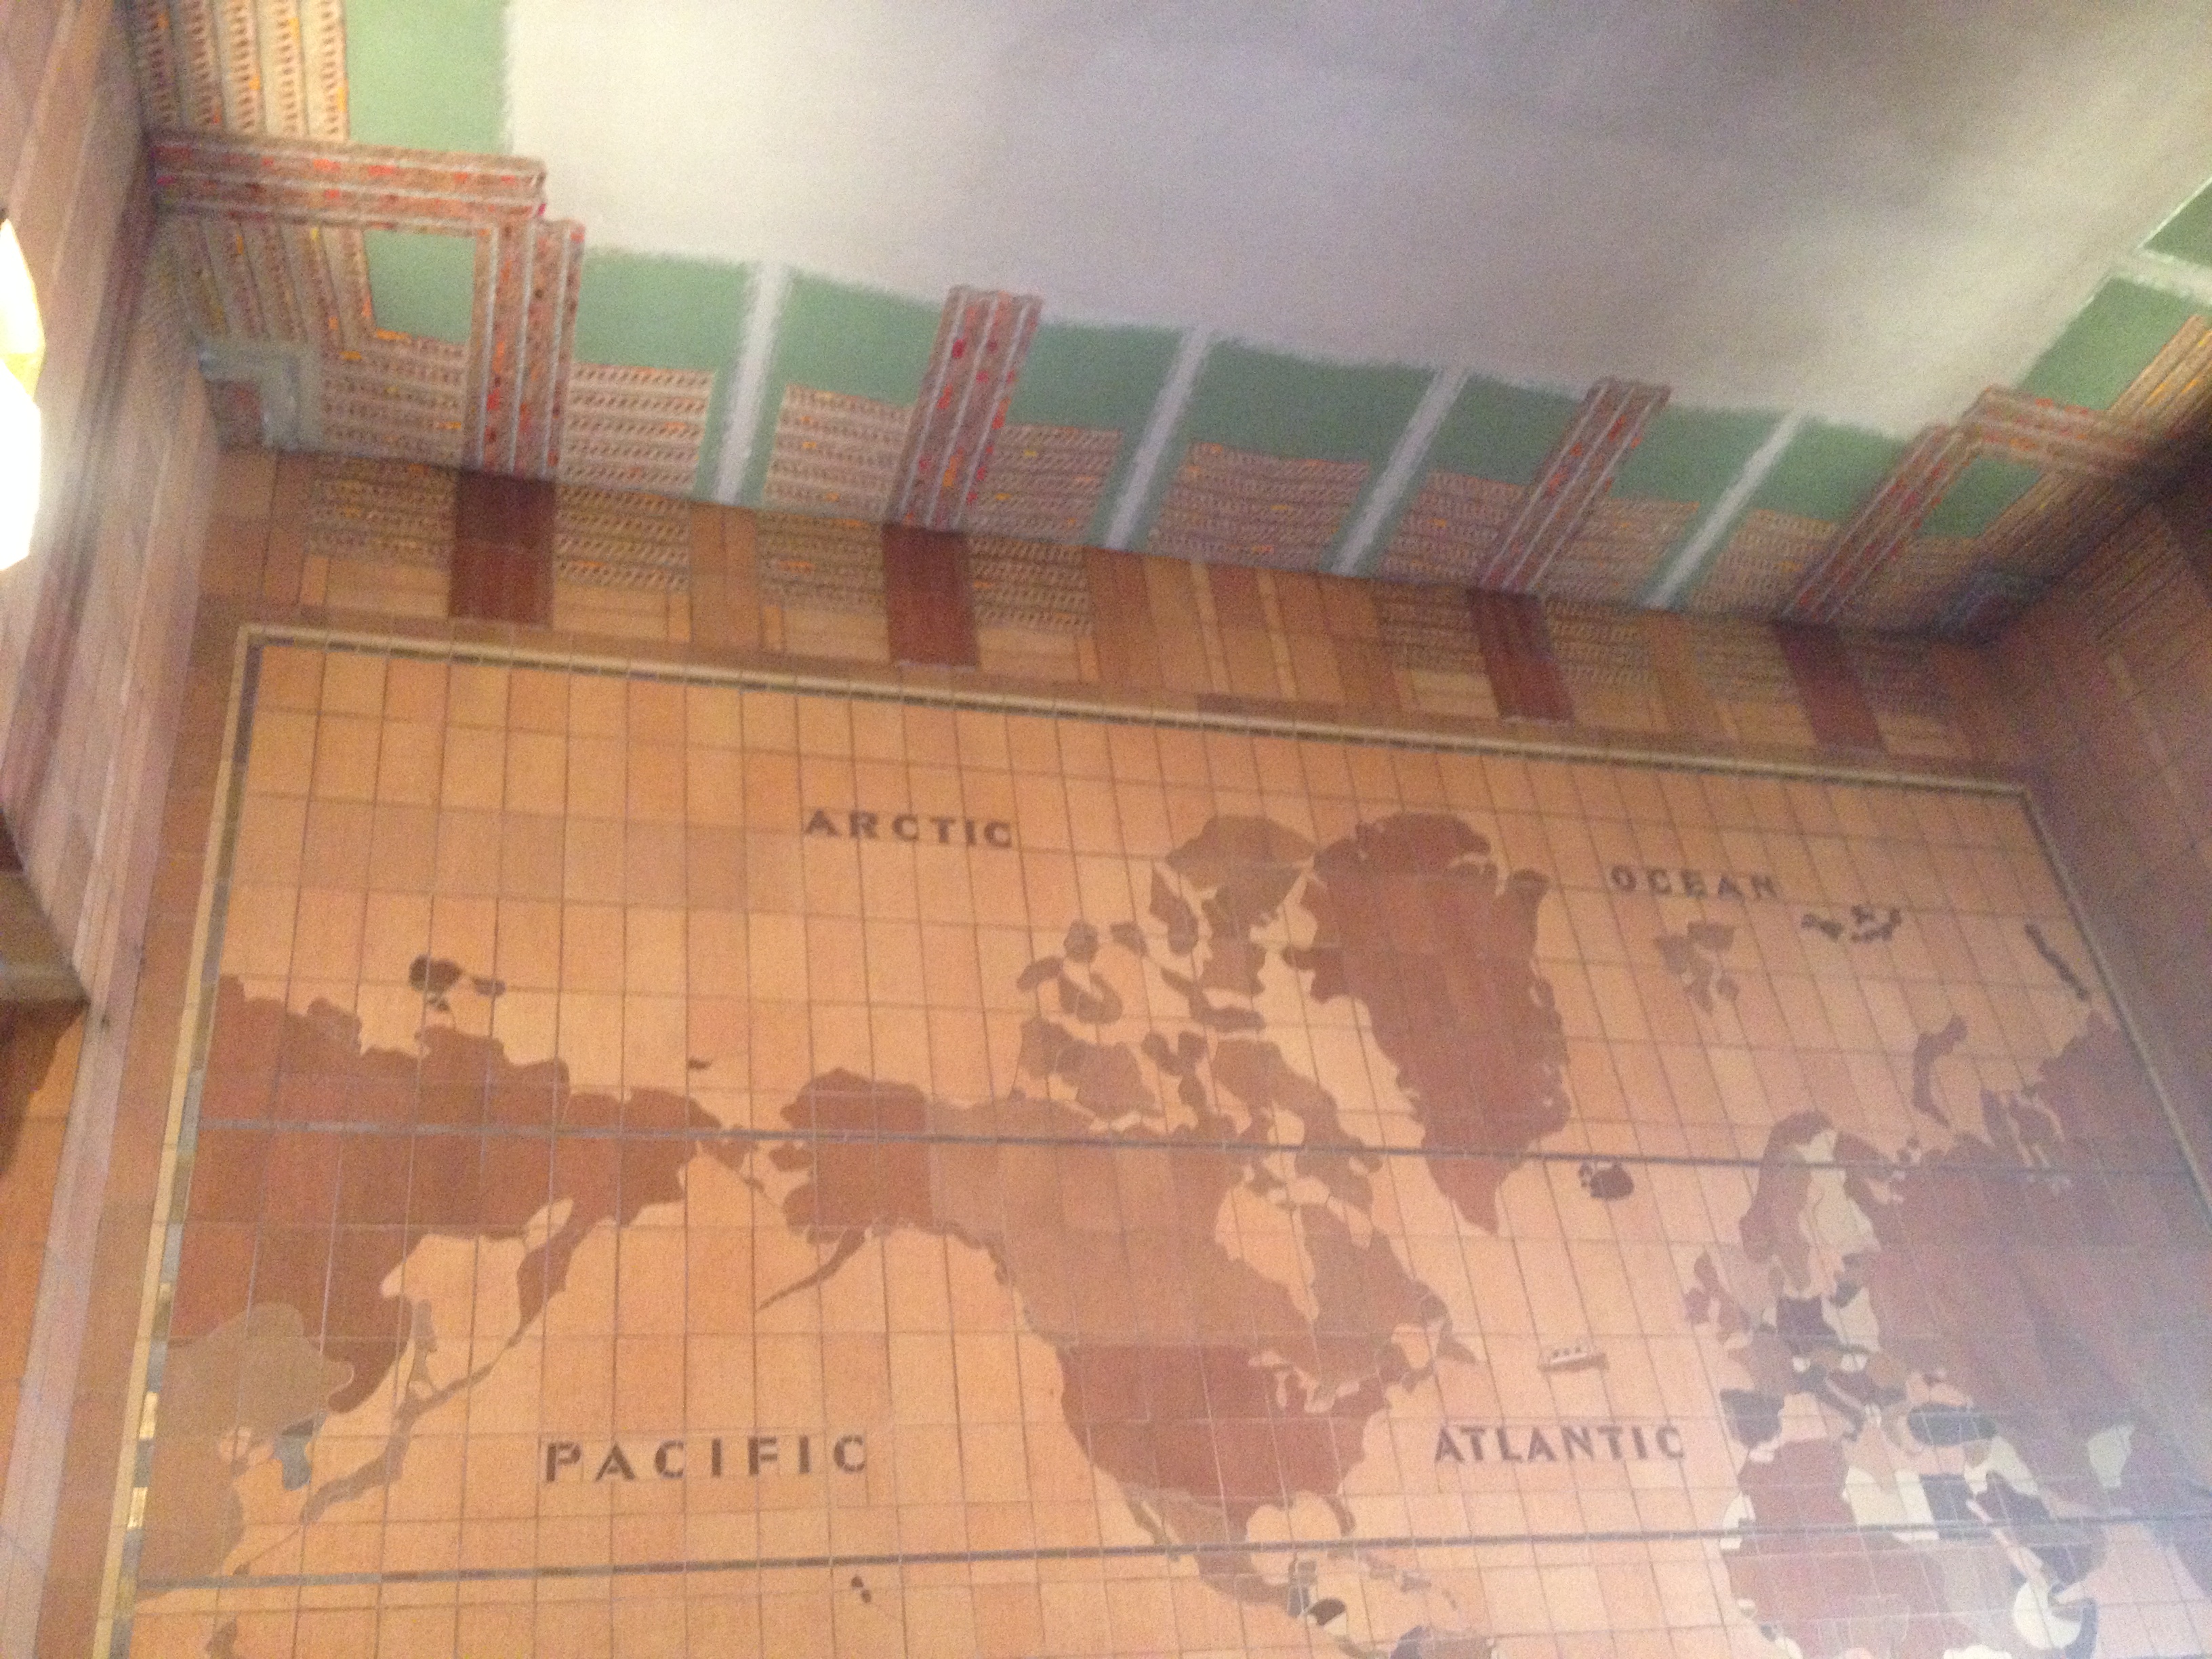 New telecommunications promised to connect people from all around the world, as this 20th century tile painting shows at the AT&T building lobby at 6th av and Walker st.